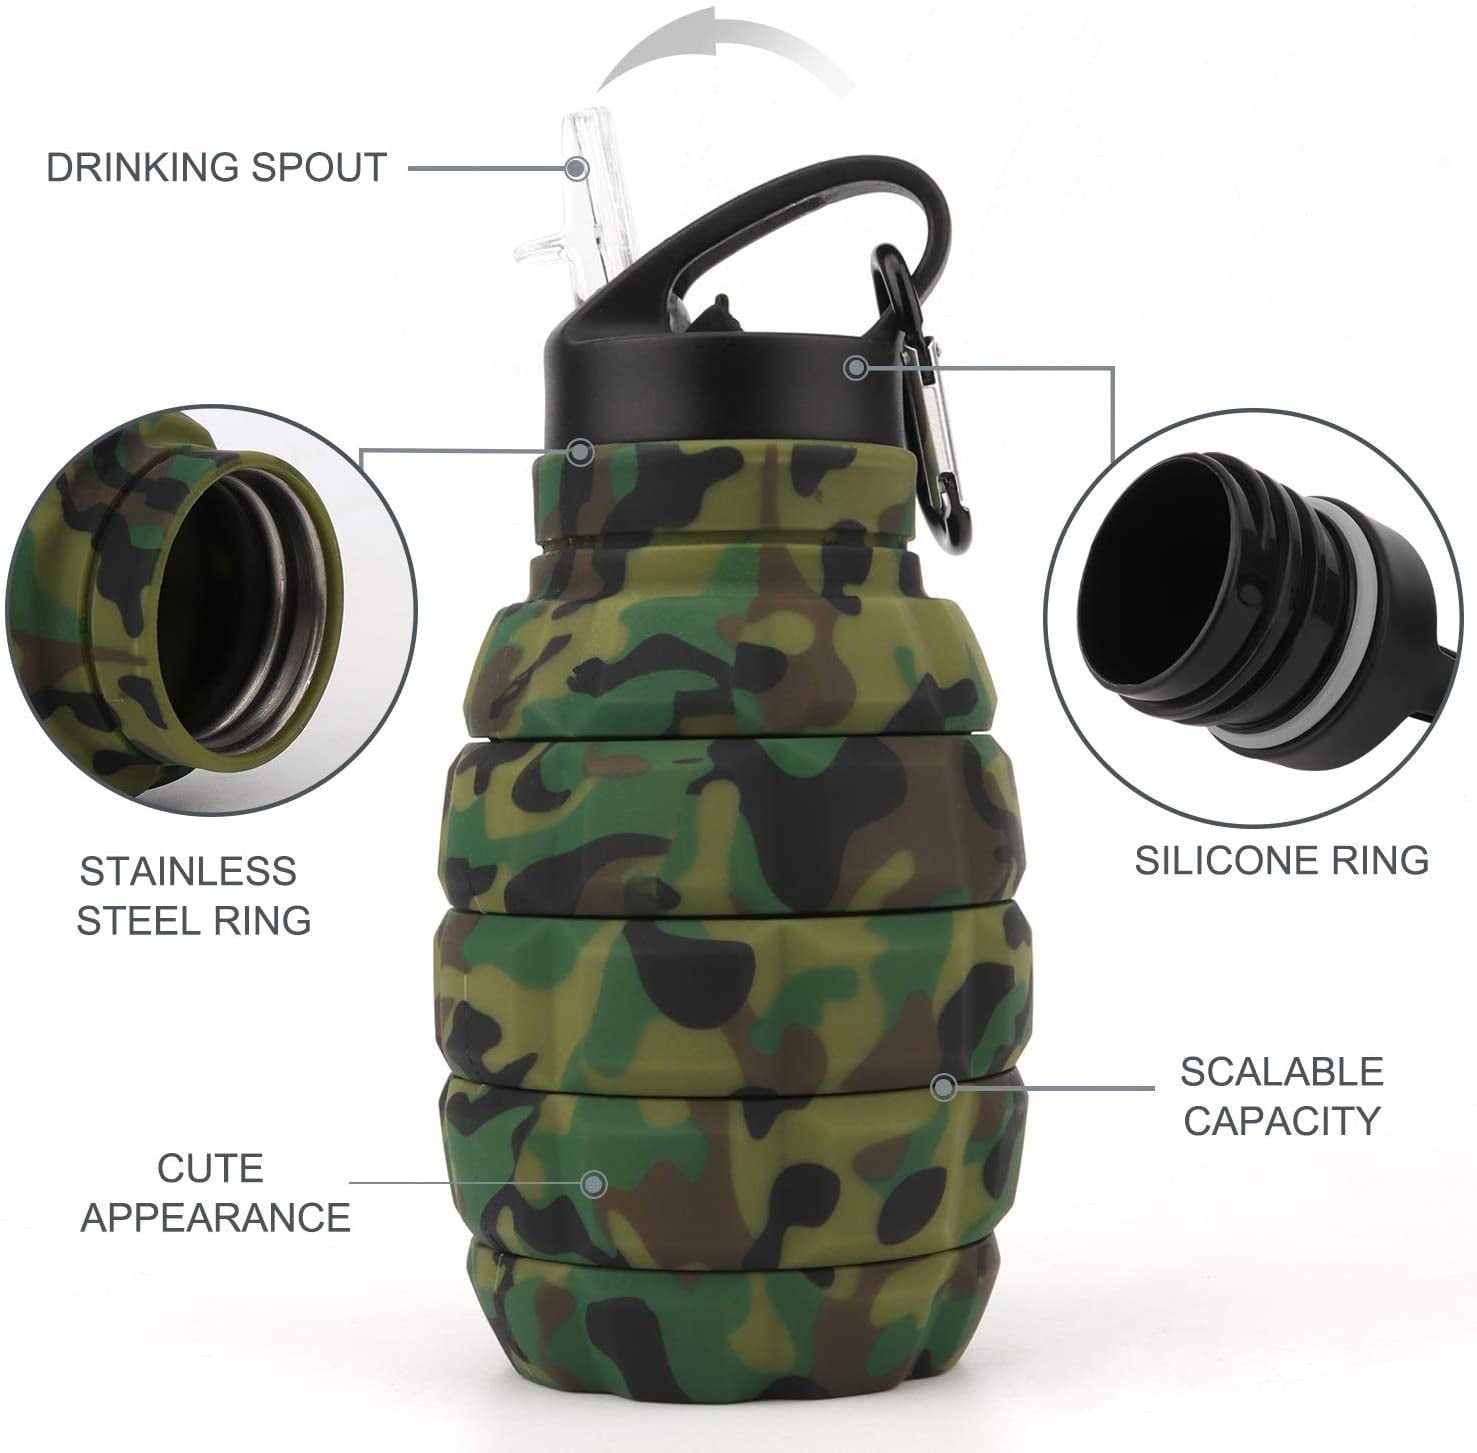 Collapsible Drinking Bottle Grenade 580ml, Bpa-free, Leak-proof Water  Bottle, Made Of Silicone, Food-safe, Sports Bottle For Bicycles, Sports,  Festiva